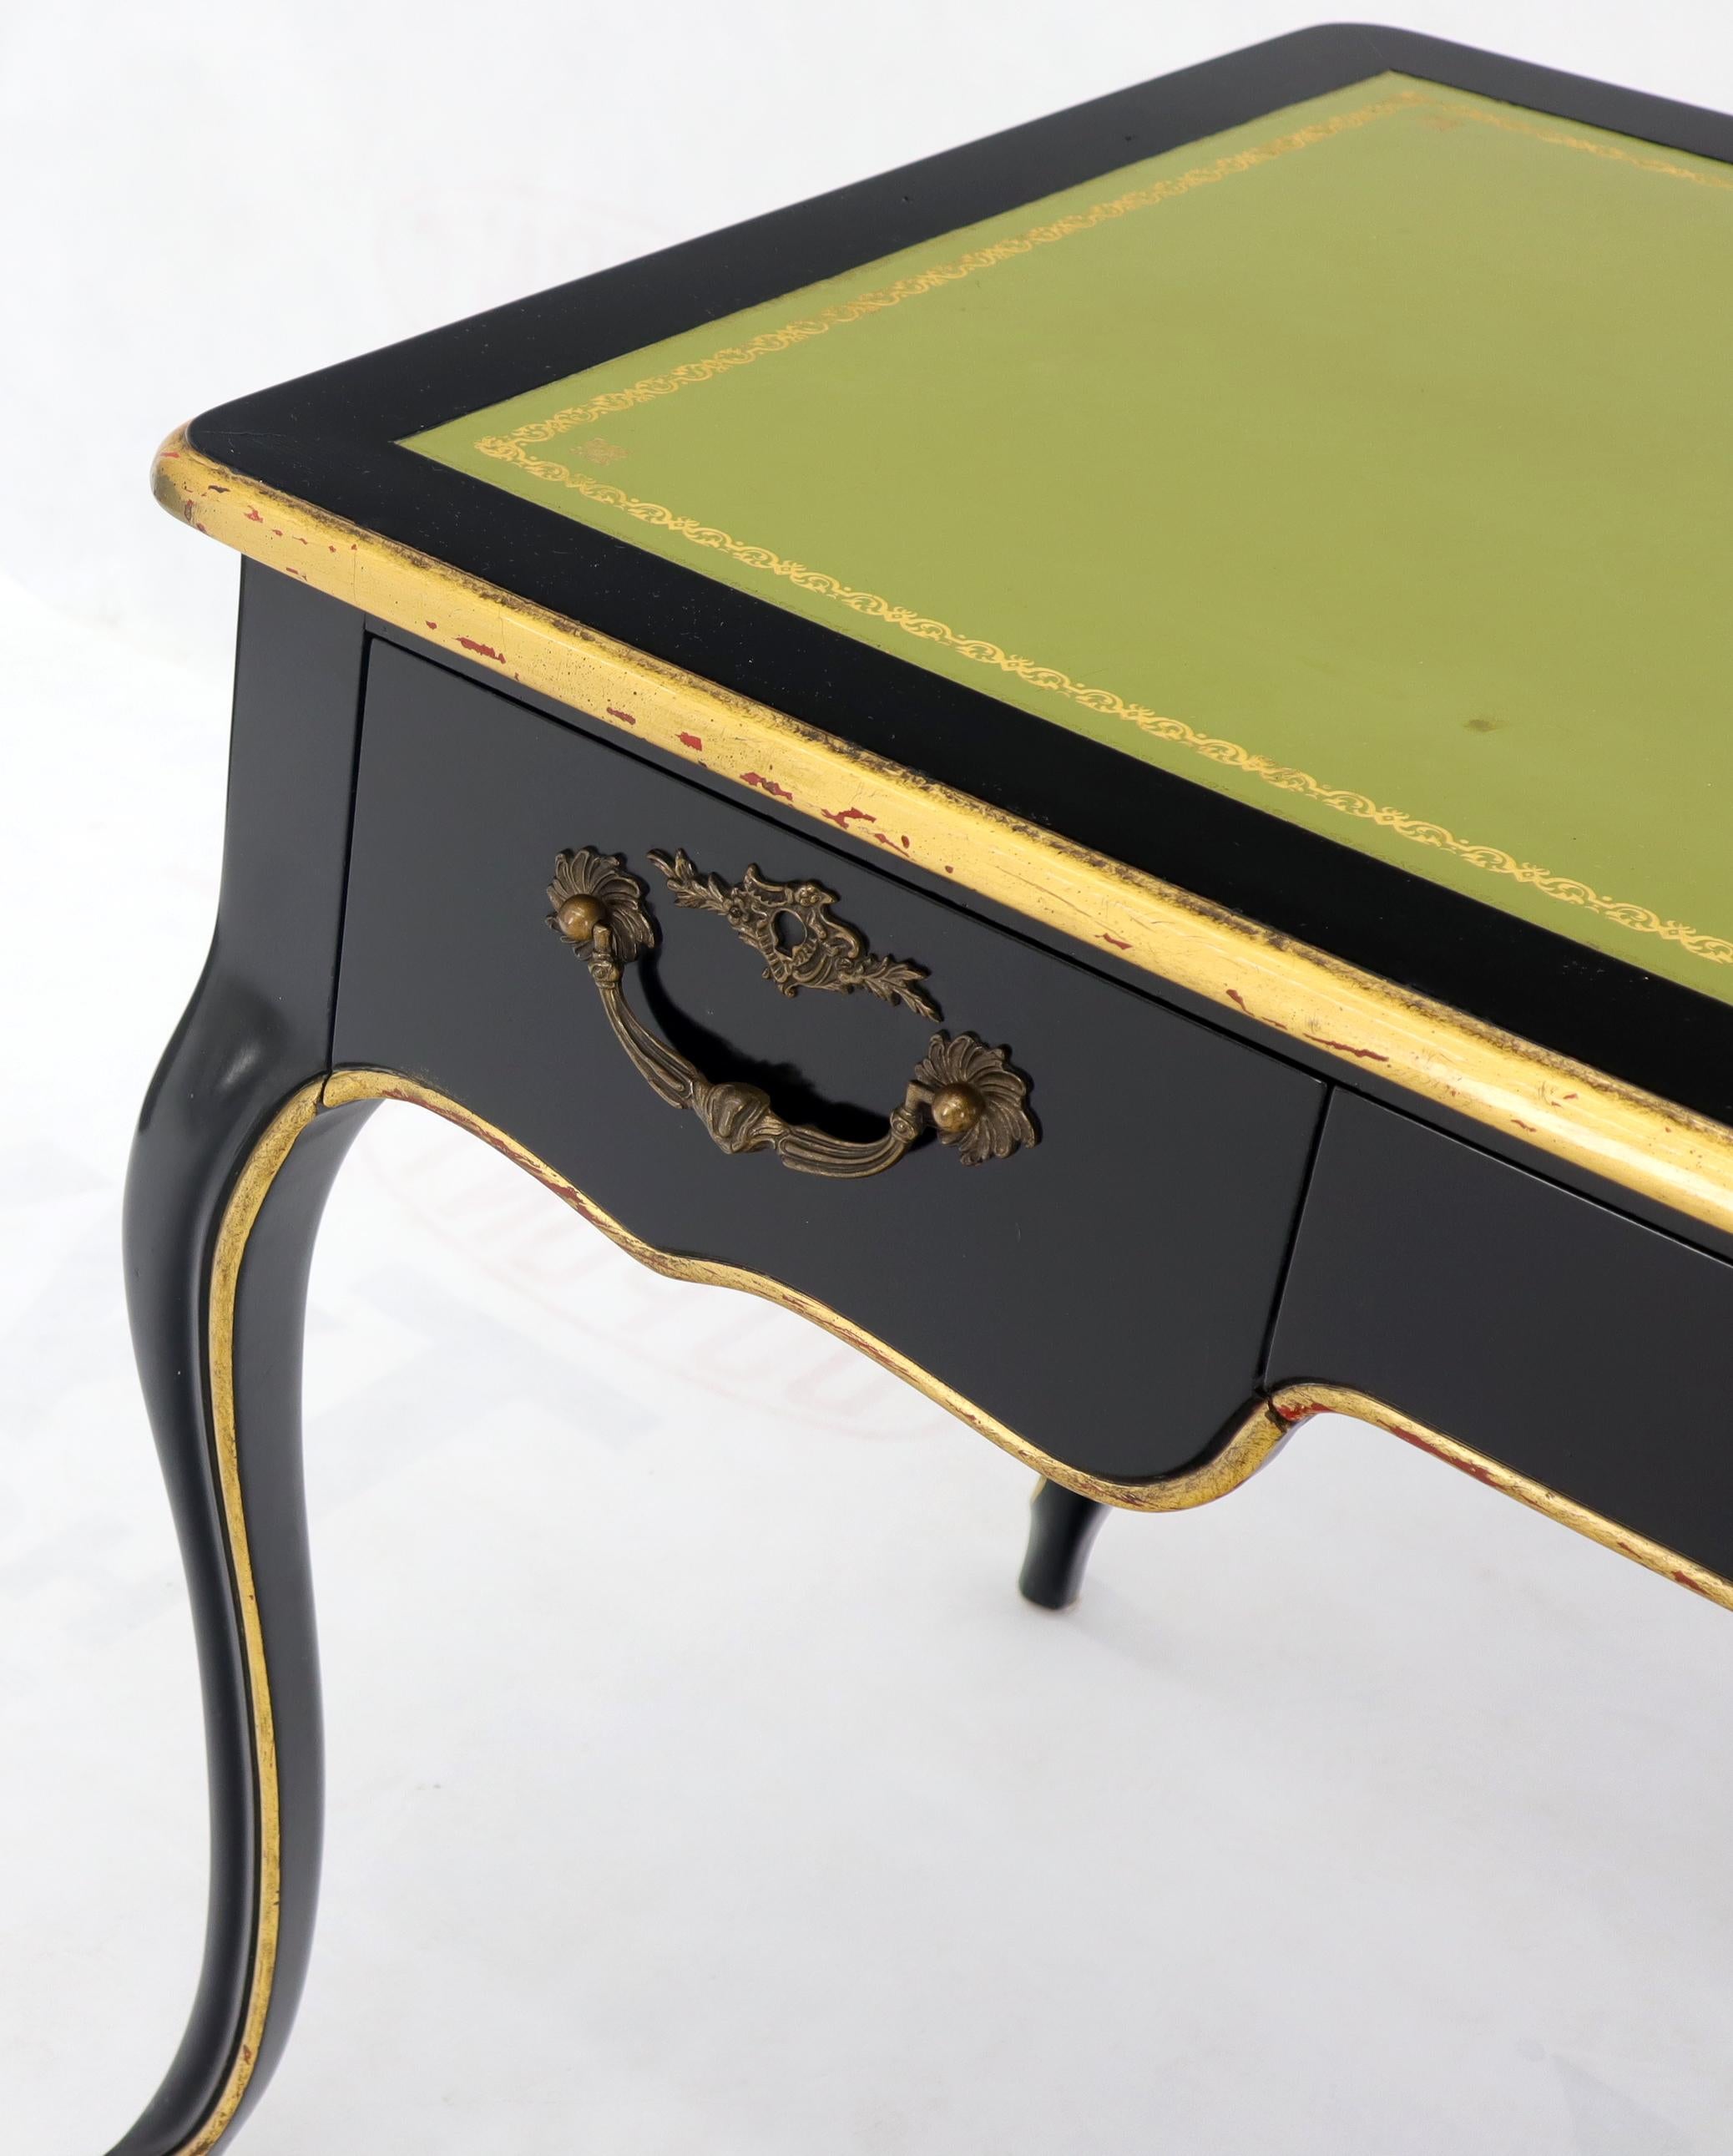 black lacquer furniture with gold trim